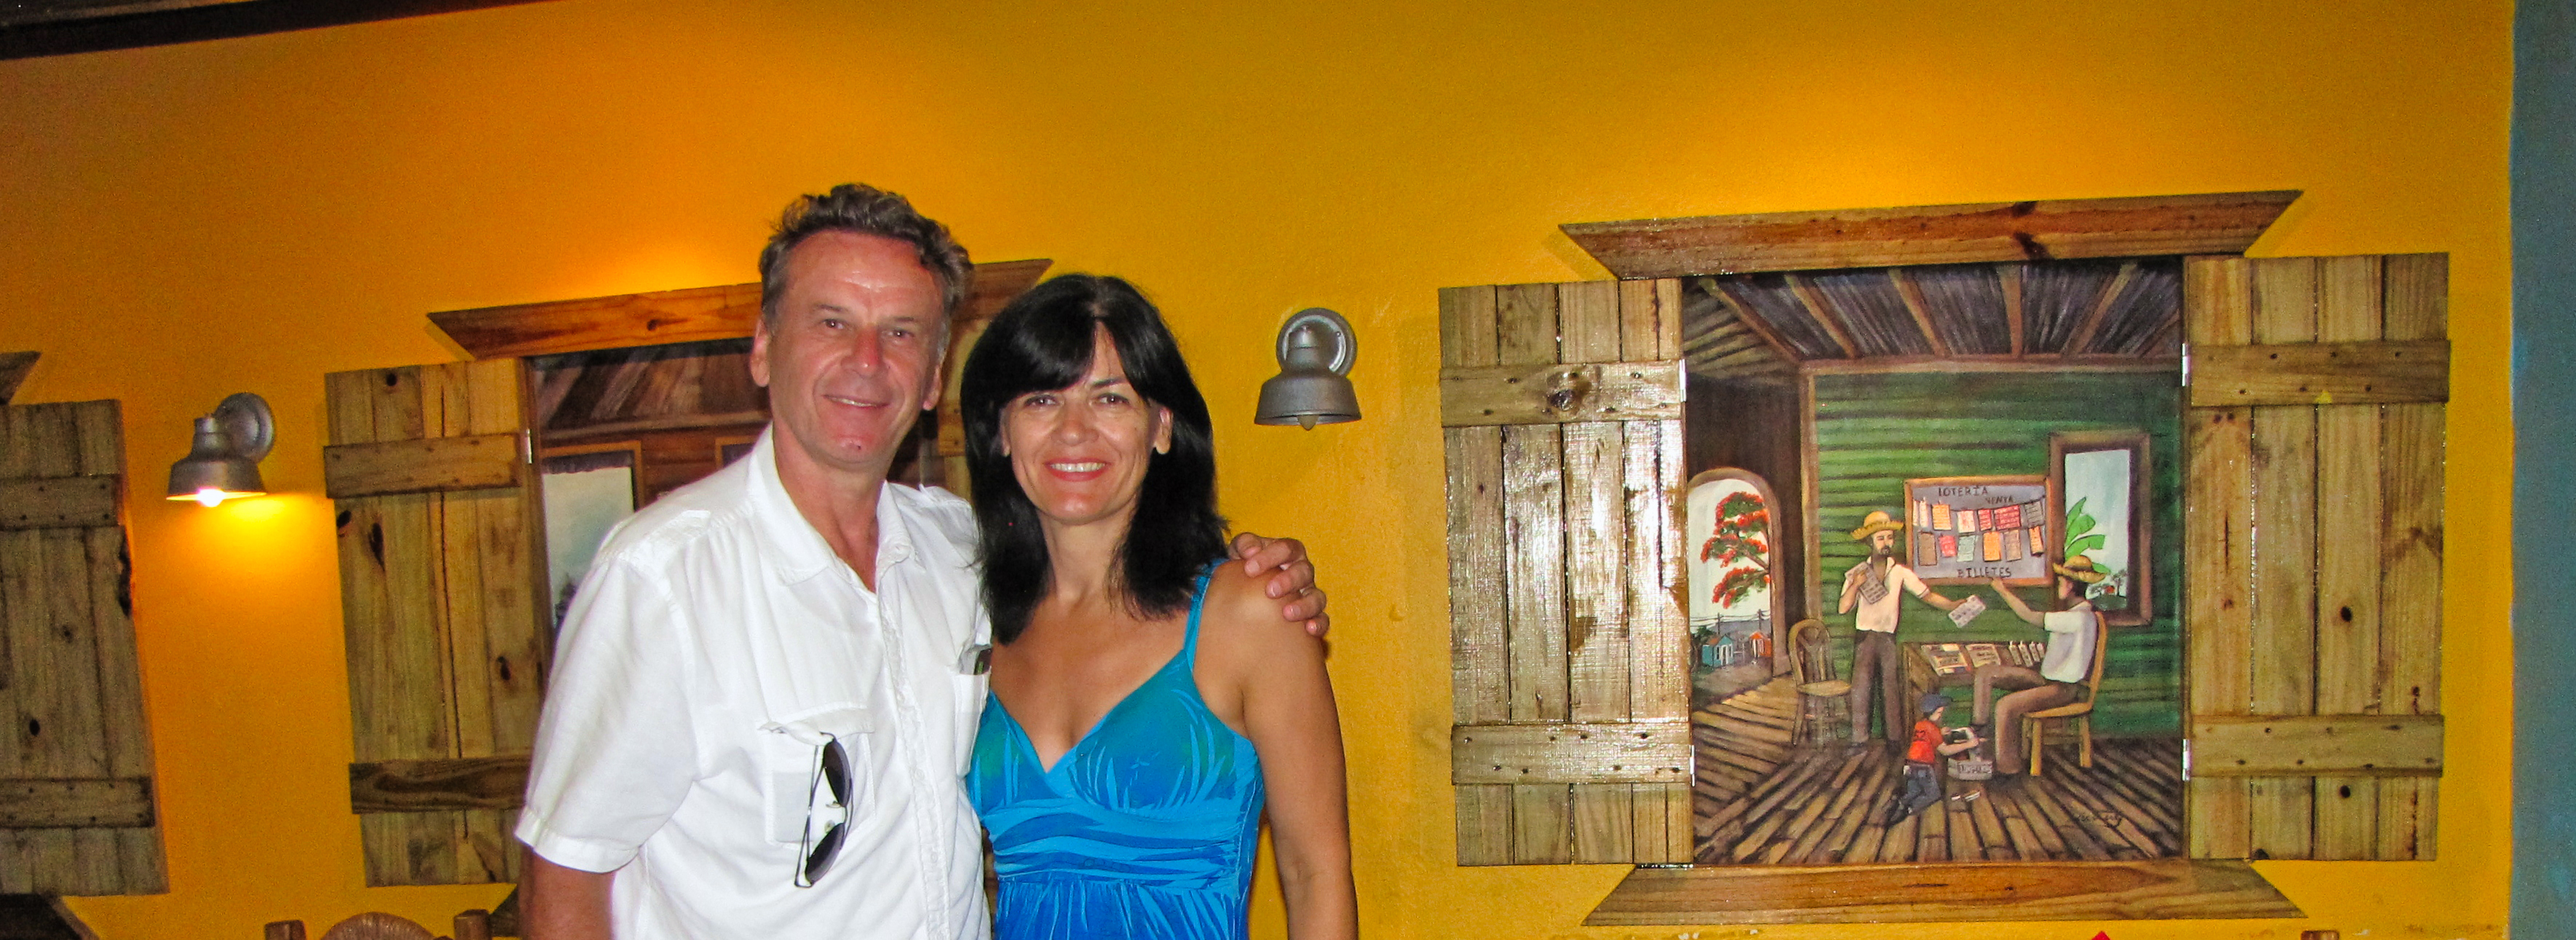 My wife and I in the restaurant in the old San Juan